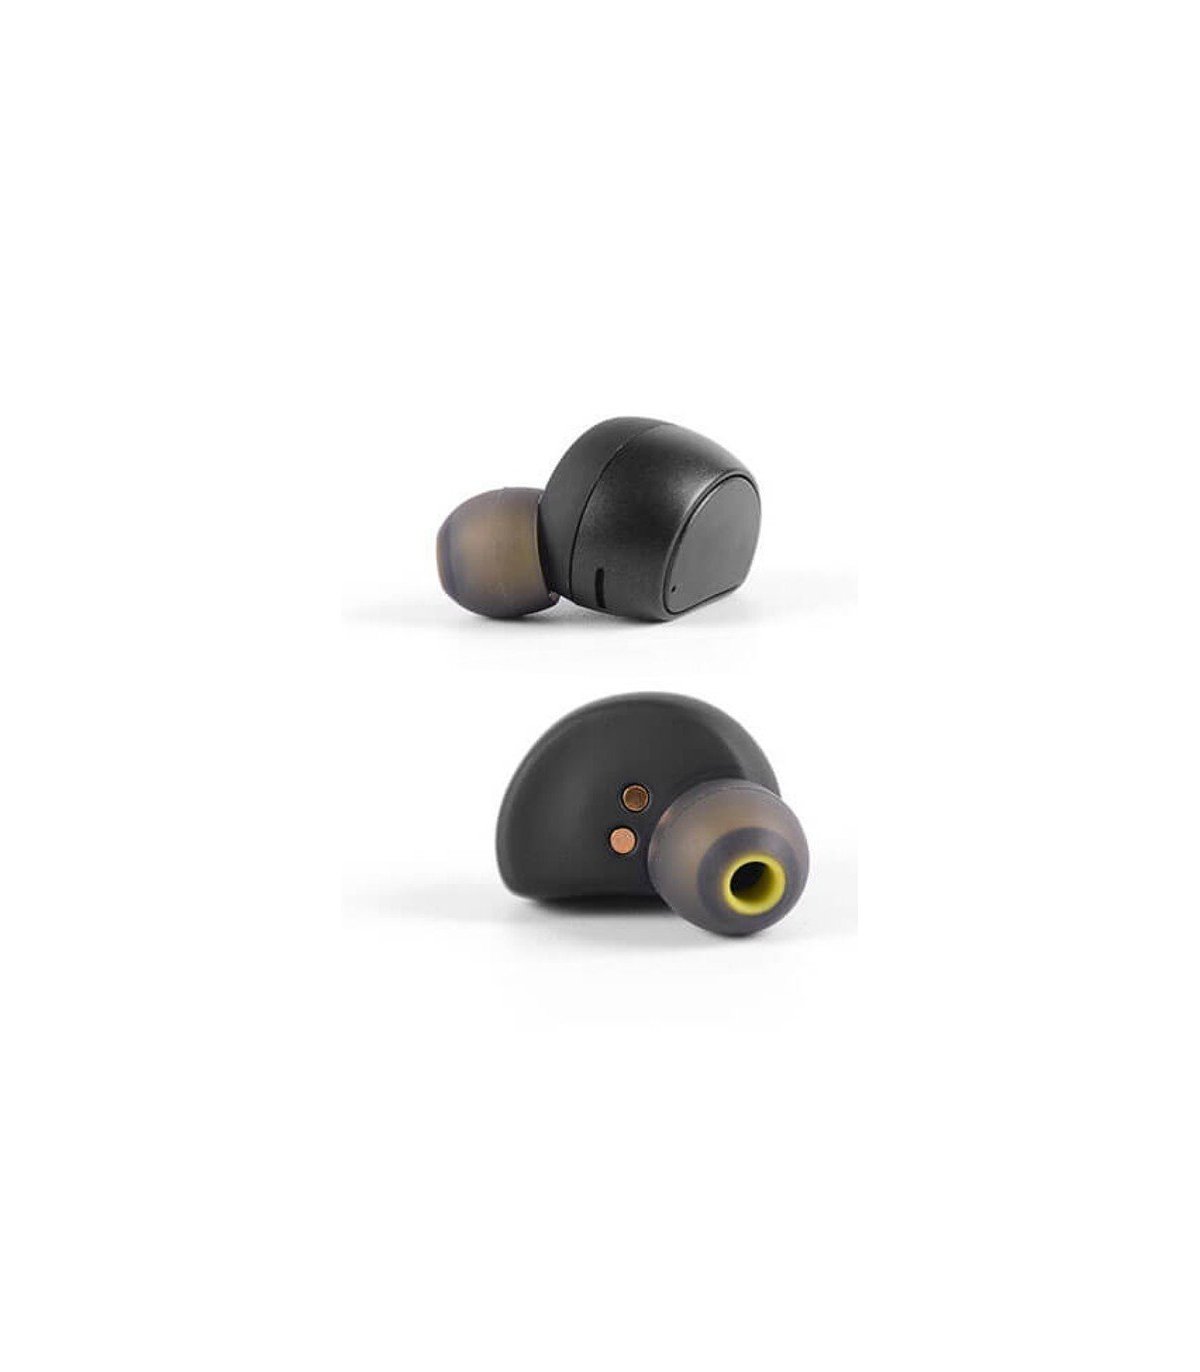 Chill TWS Wireless Stereo Bluetooth In-Ear Earbuds with chargebox